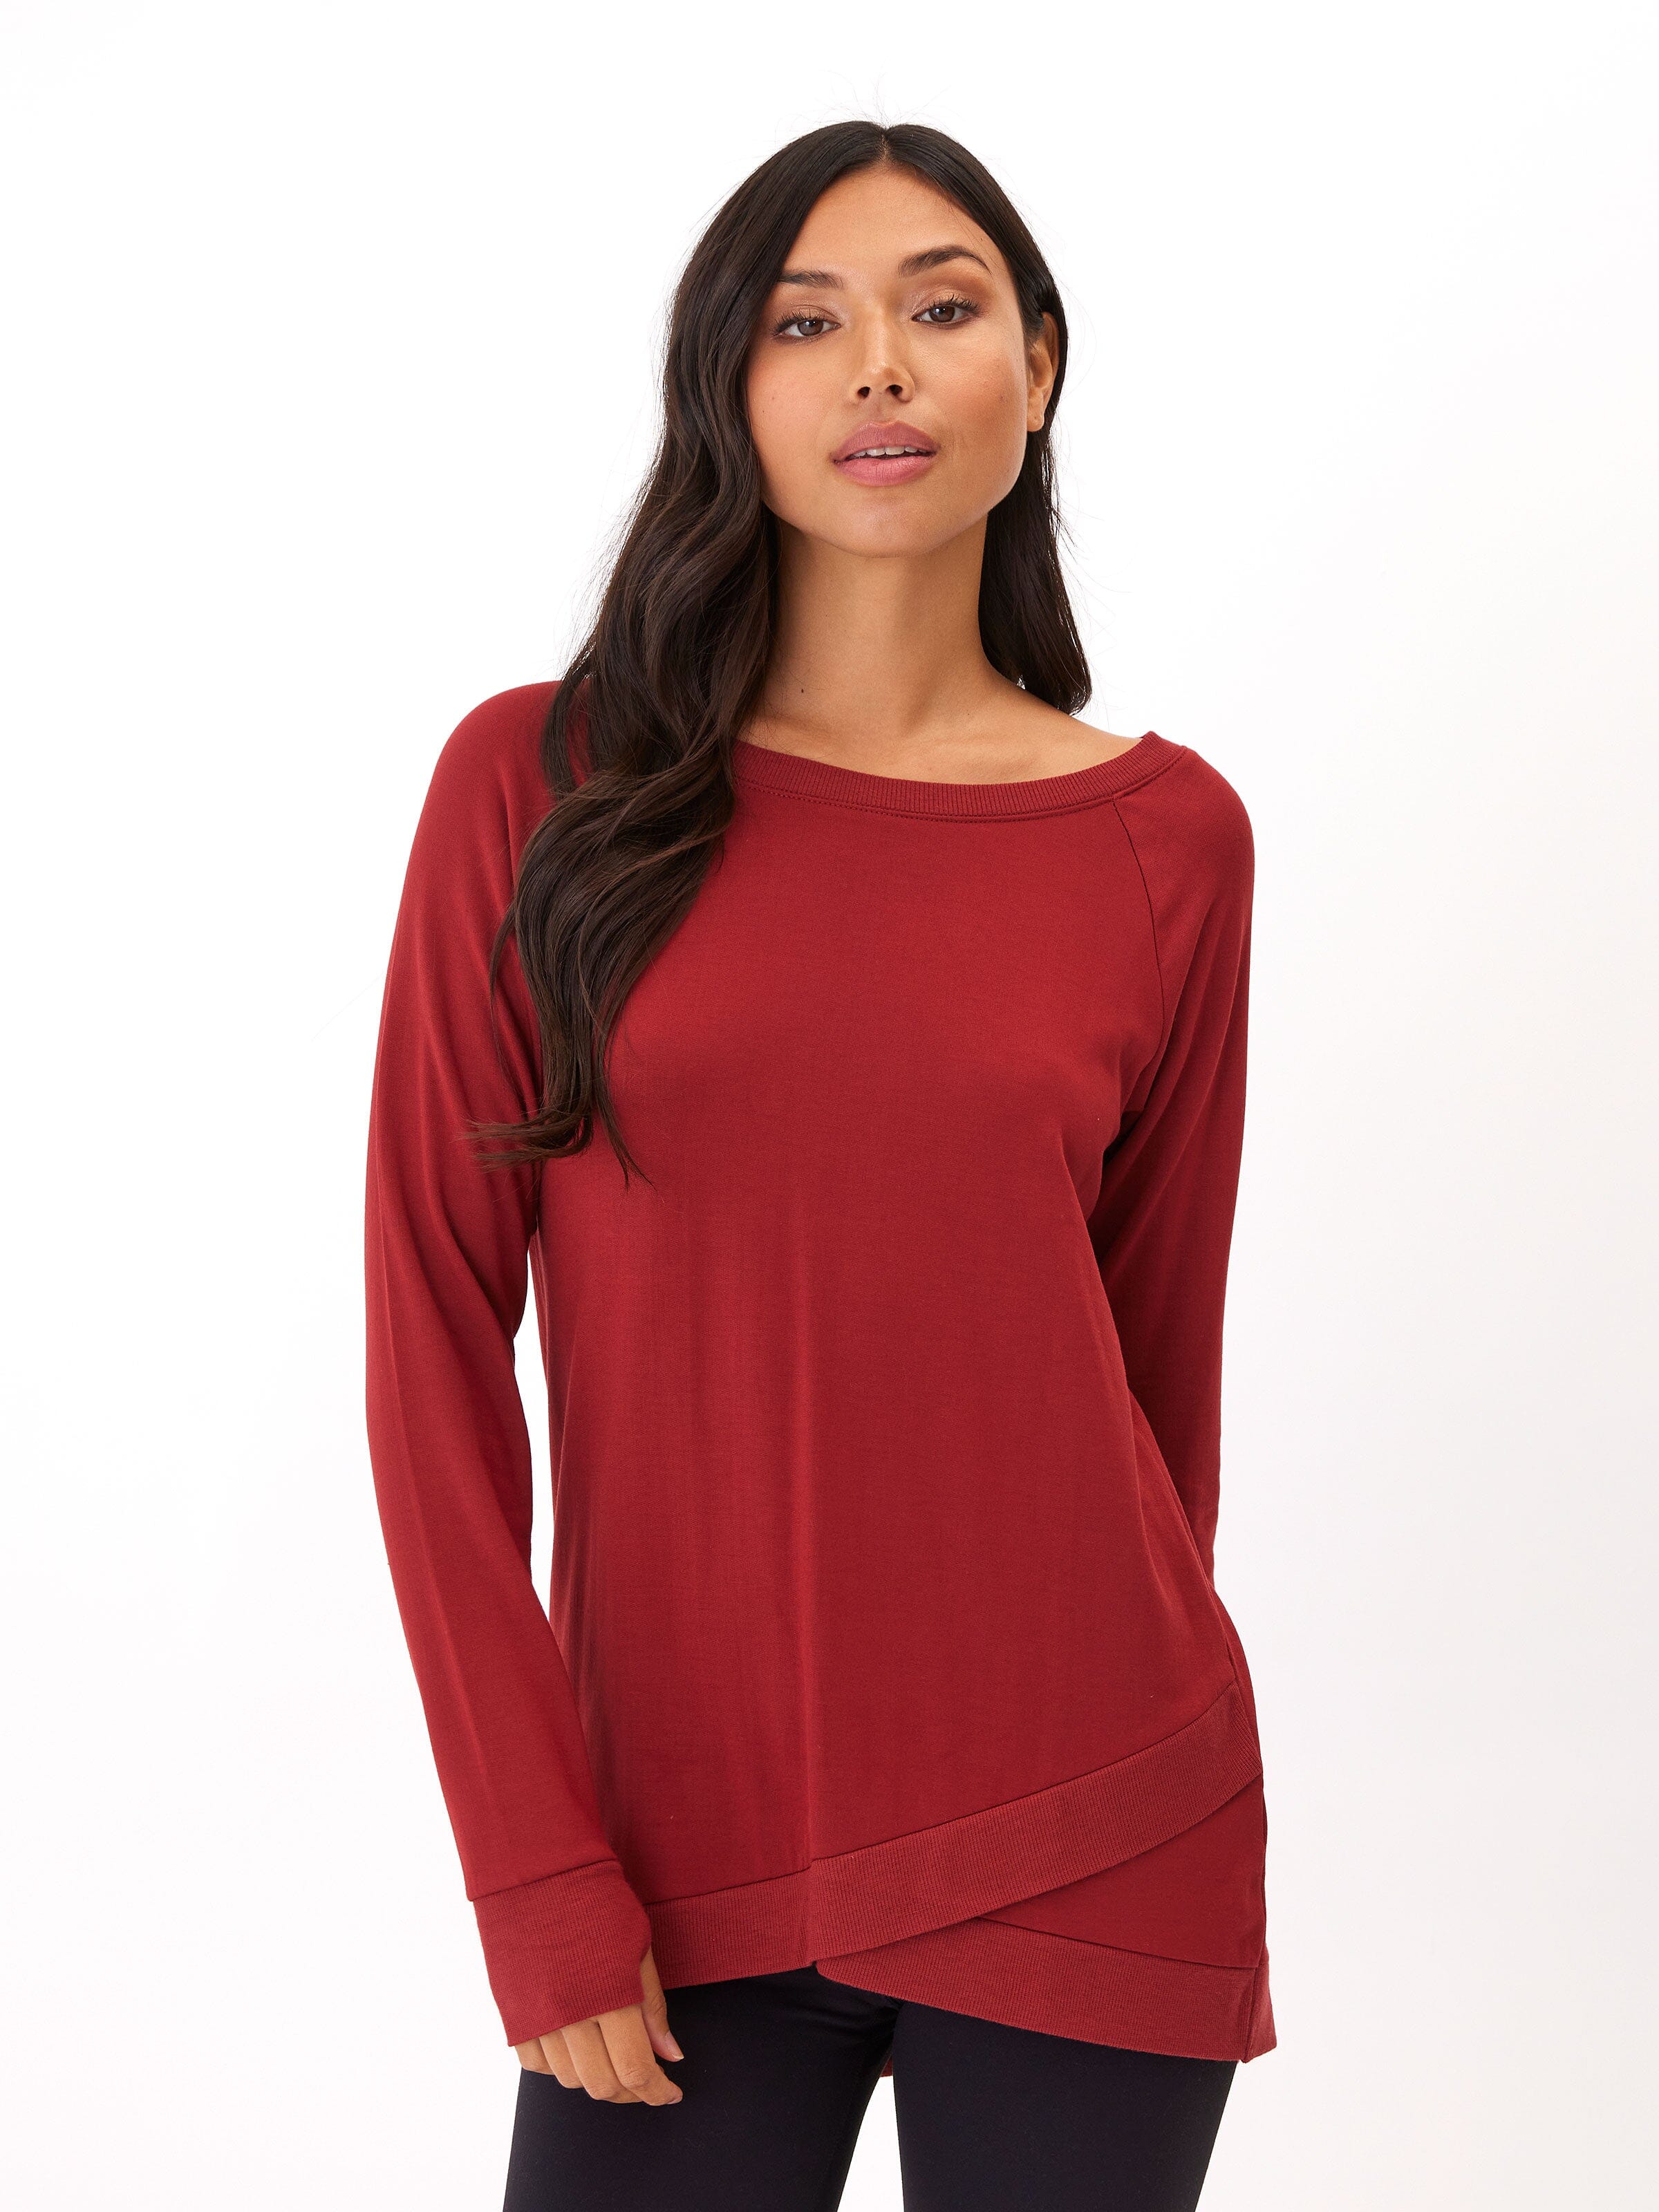 Sustainable New Arrivals – Threads 4 Thought